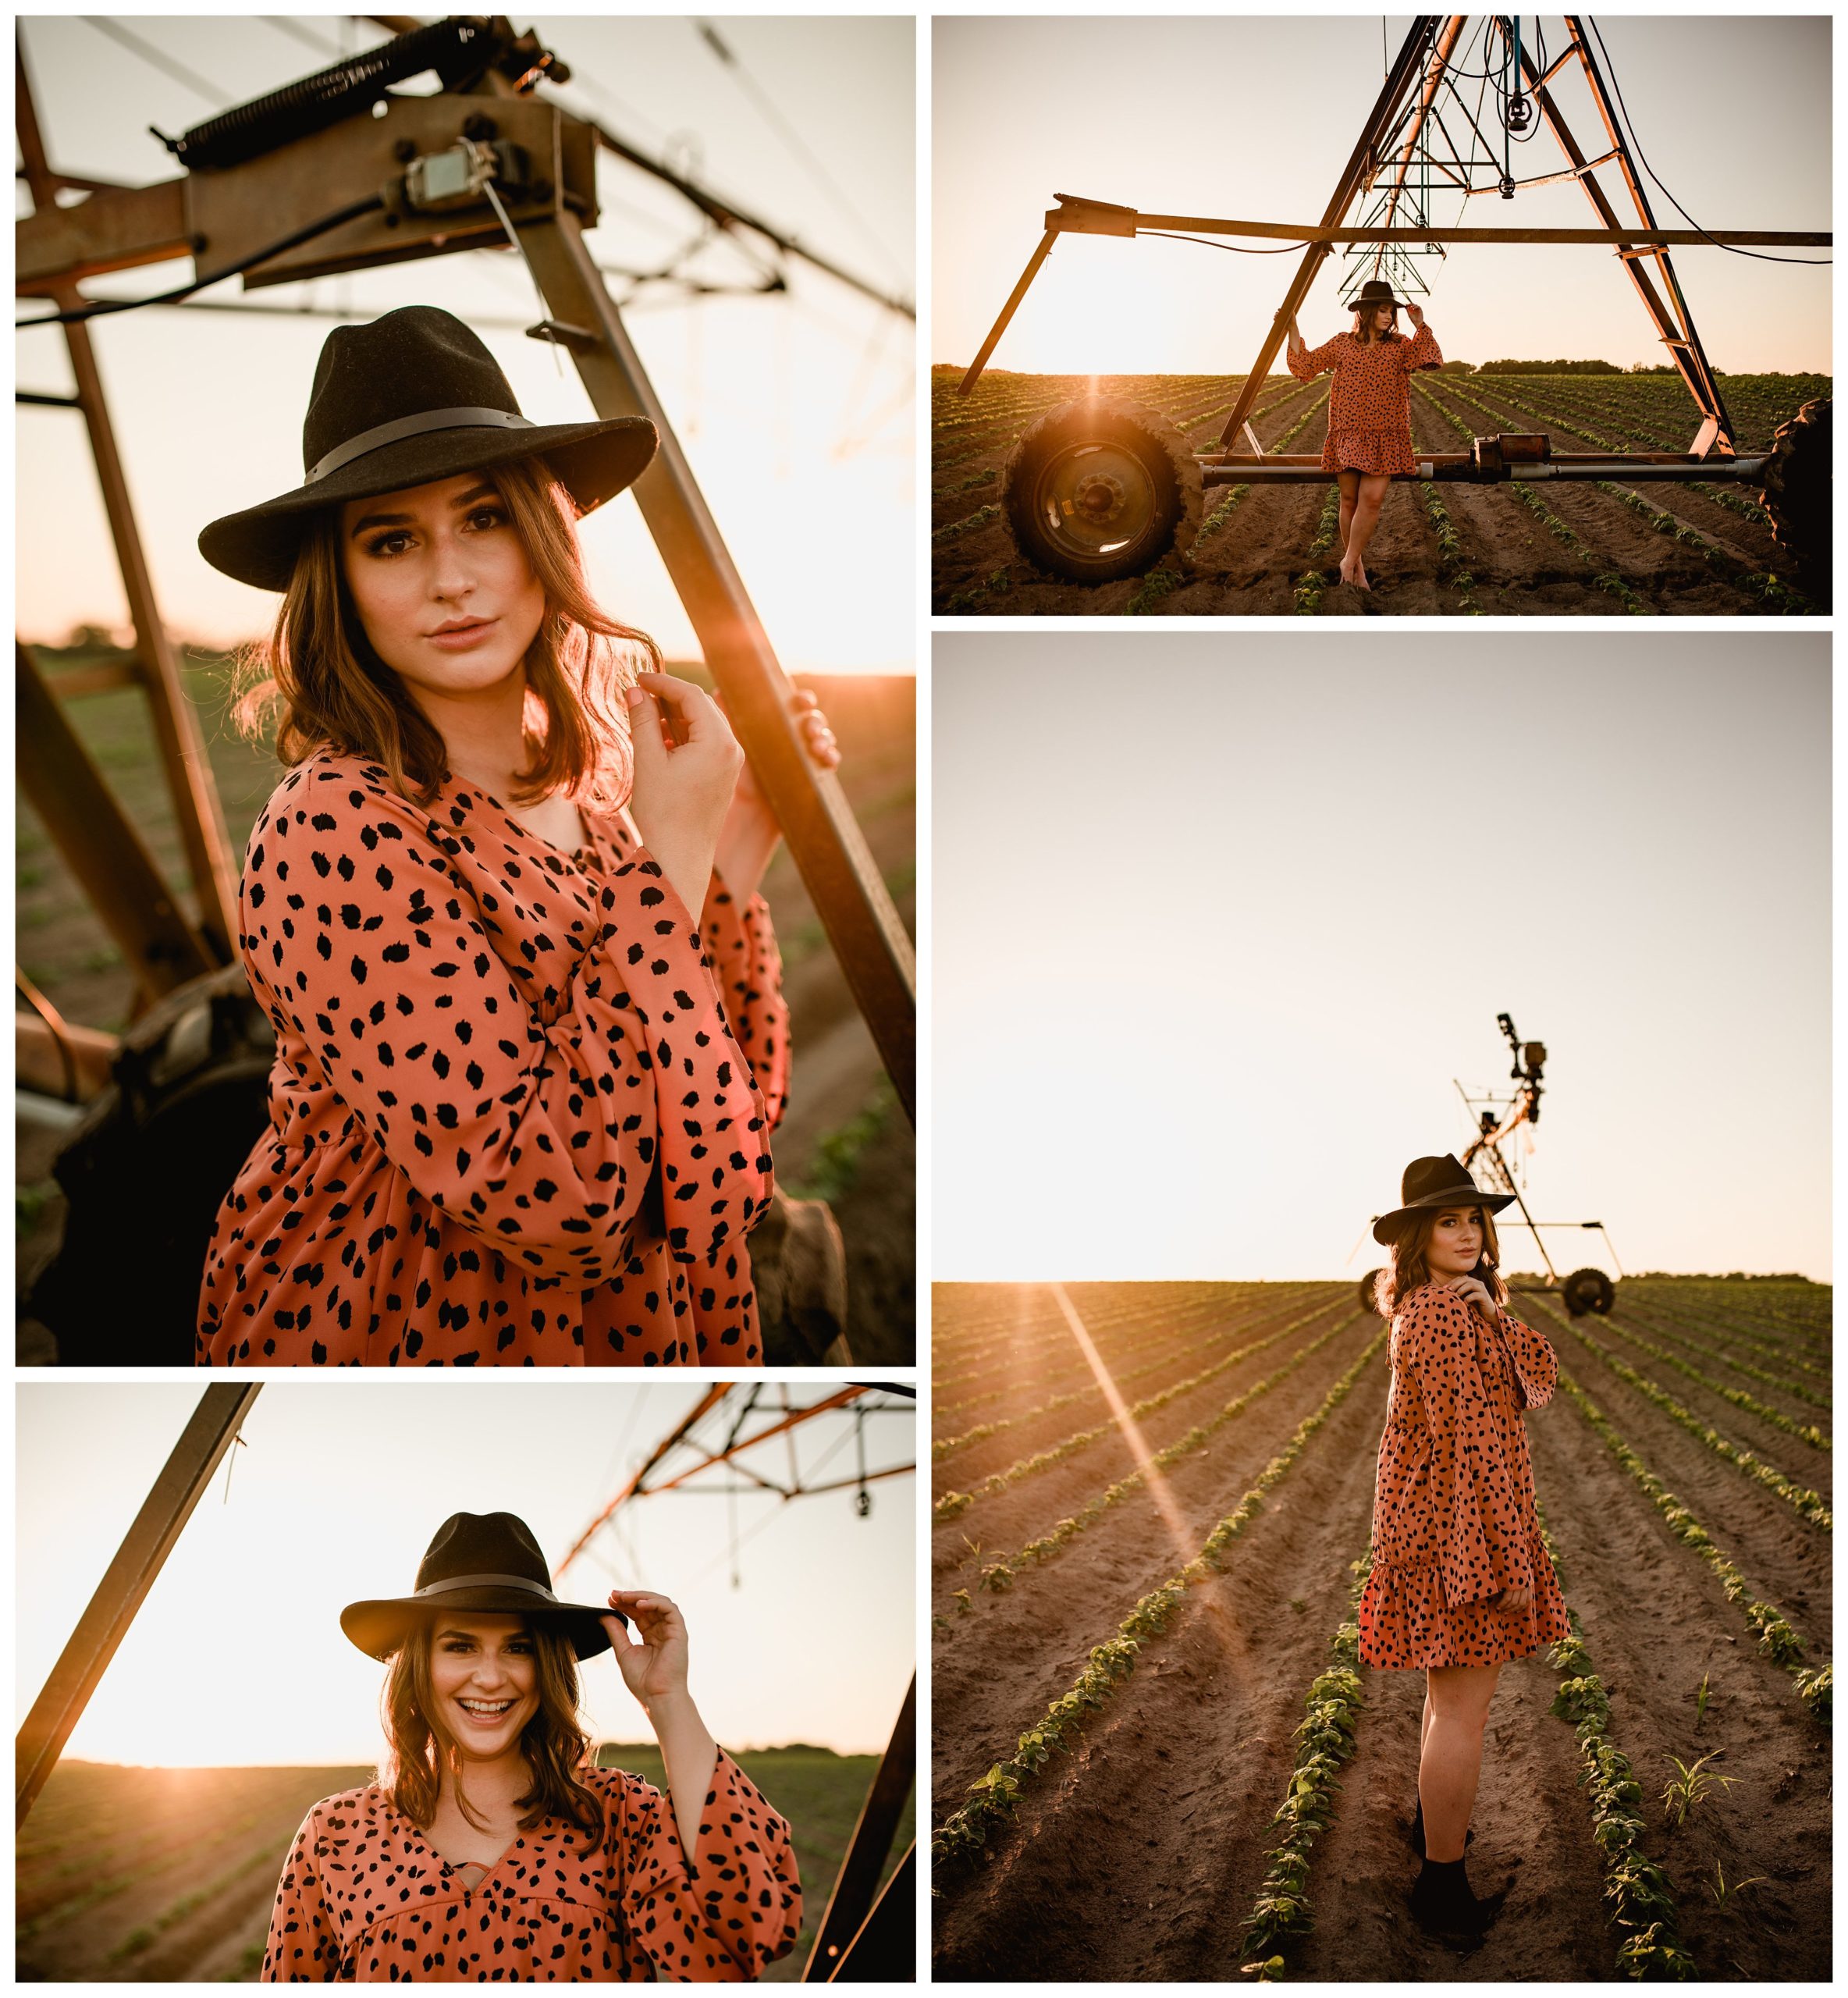 Girl poses at a farm in Florida during the golden hour